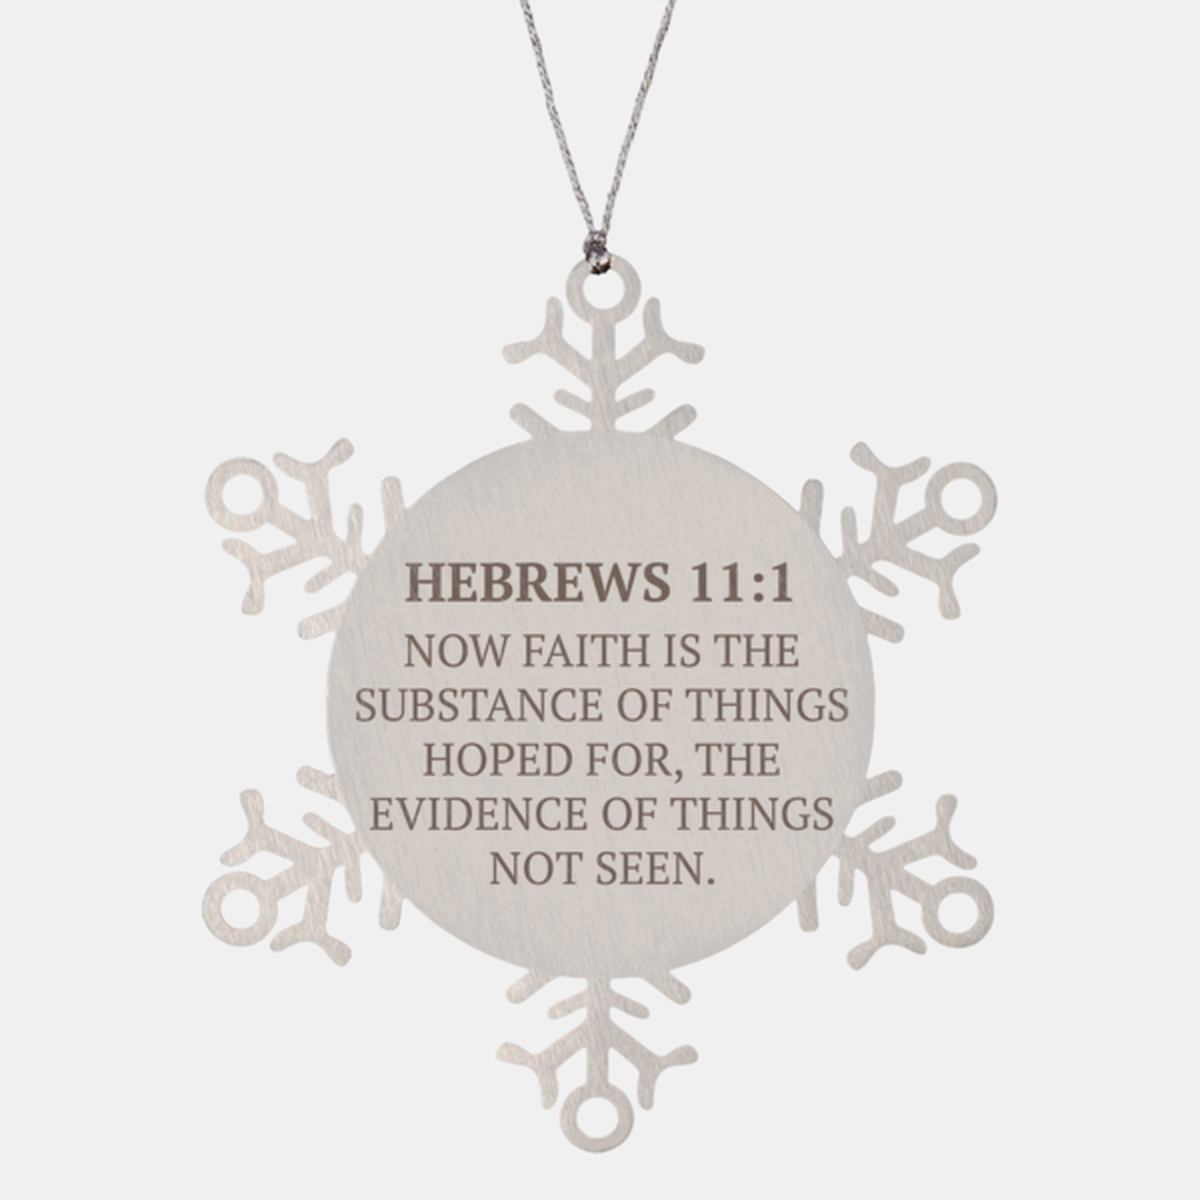 Christian Ornaments For Christmas Tree, Now Faith Is The Substance Of Things Hoped For, Religious Christmas Decorations, Scripture Ornaments Gifts, Bible Verse Ornament